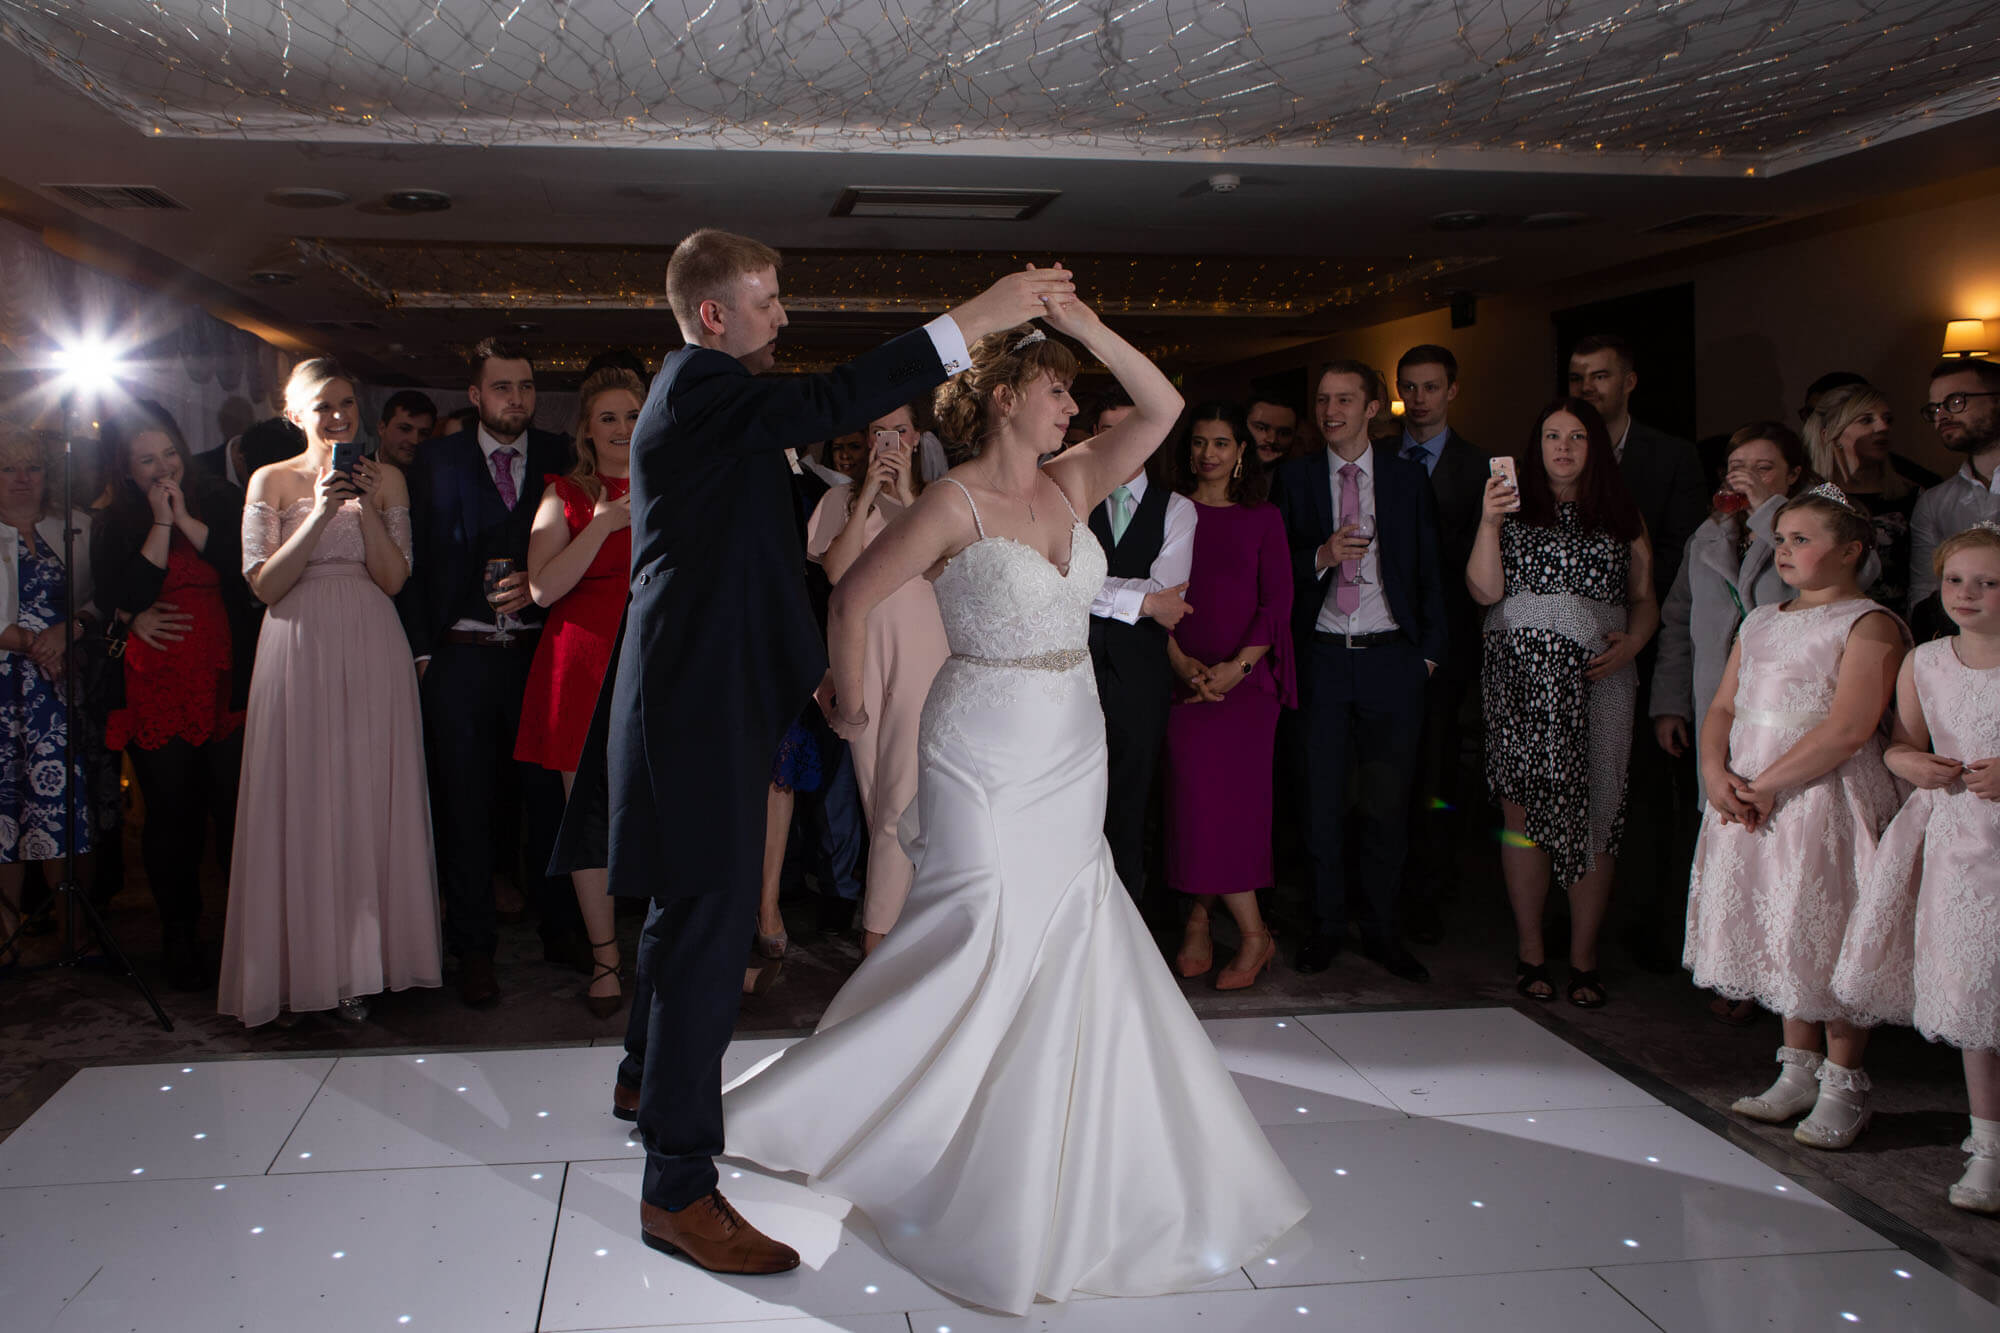 The couple perform a surprise choreographed first dance for the guests